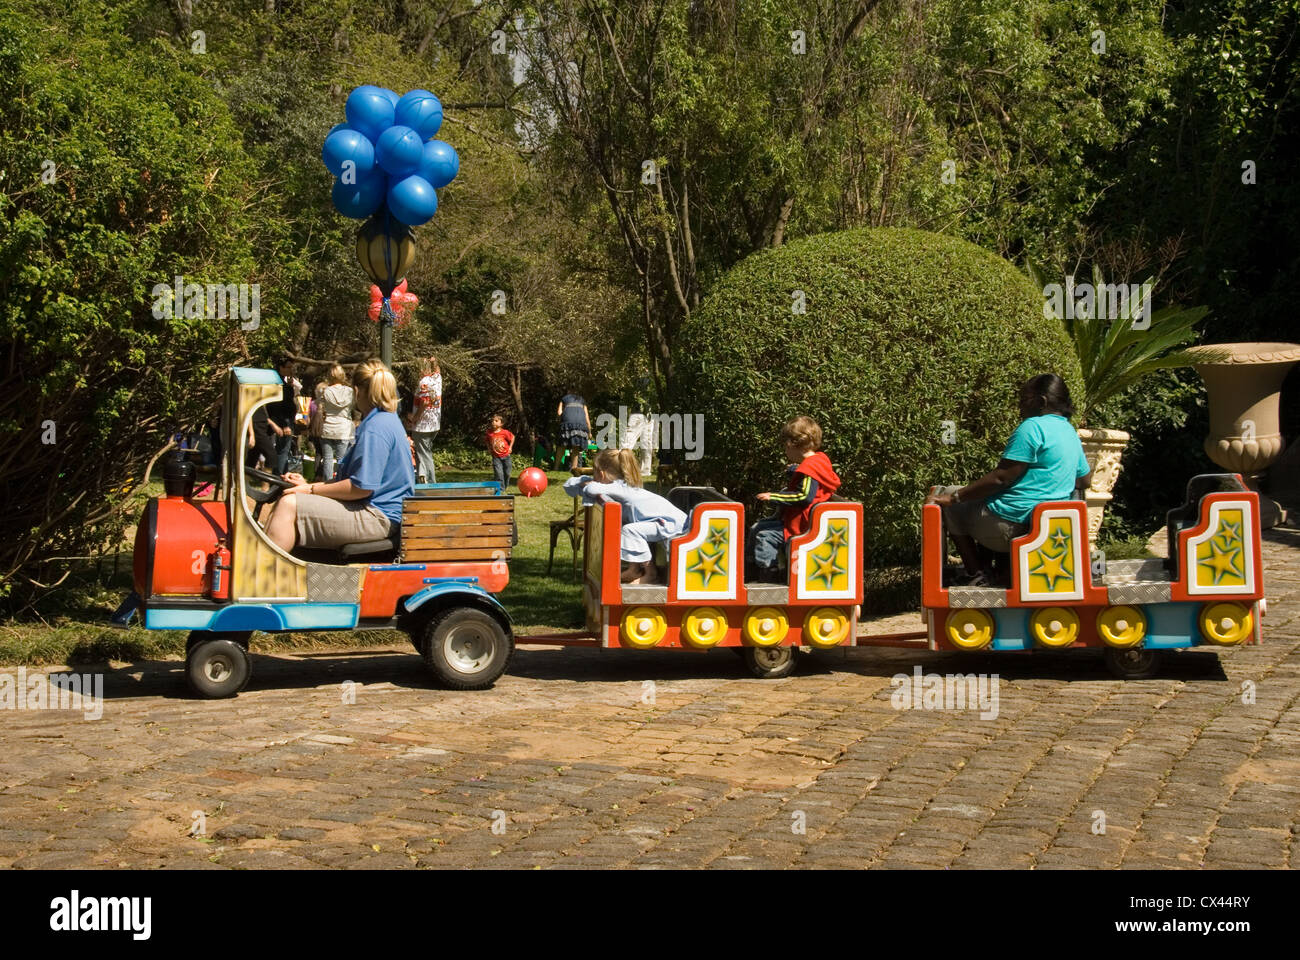 Children's party with train ride. Stock Photo